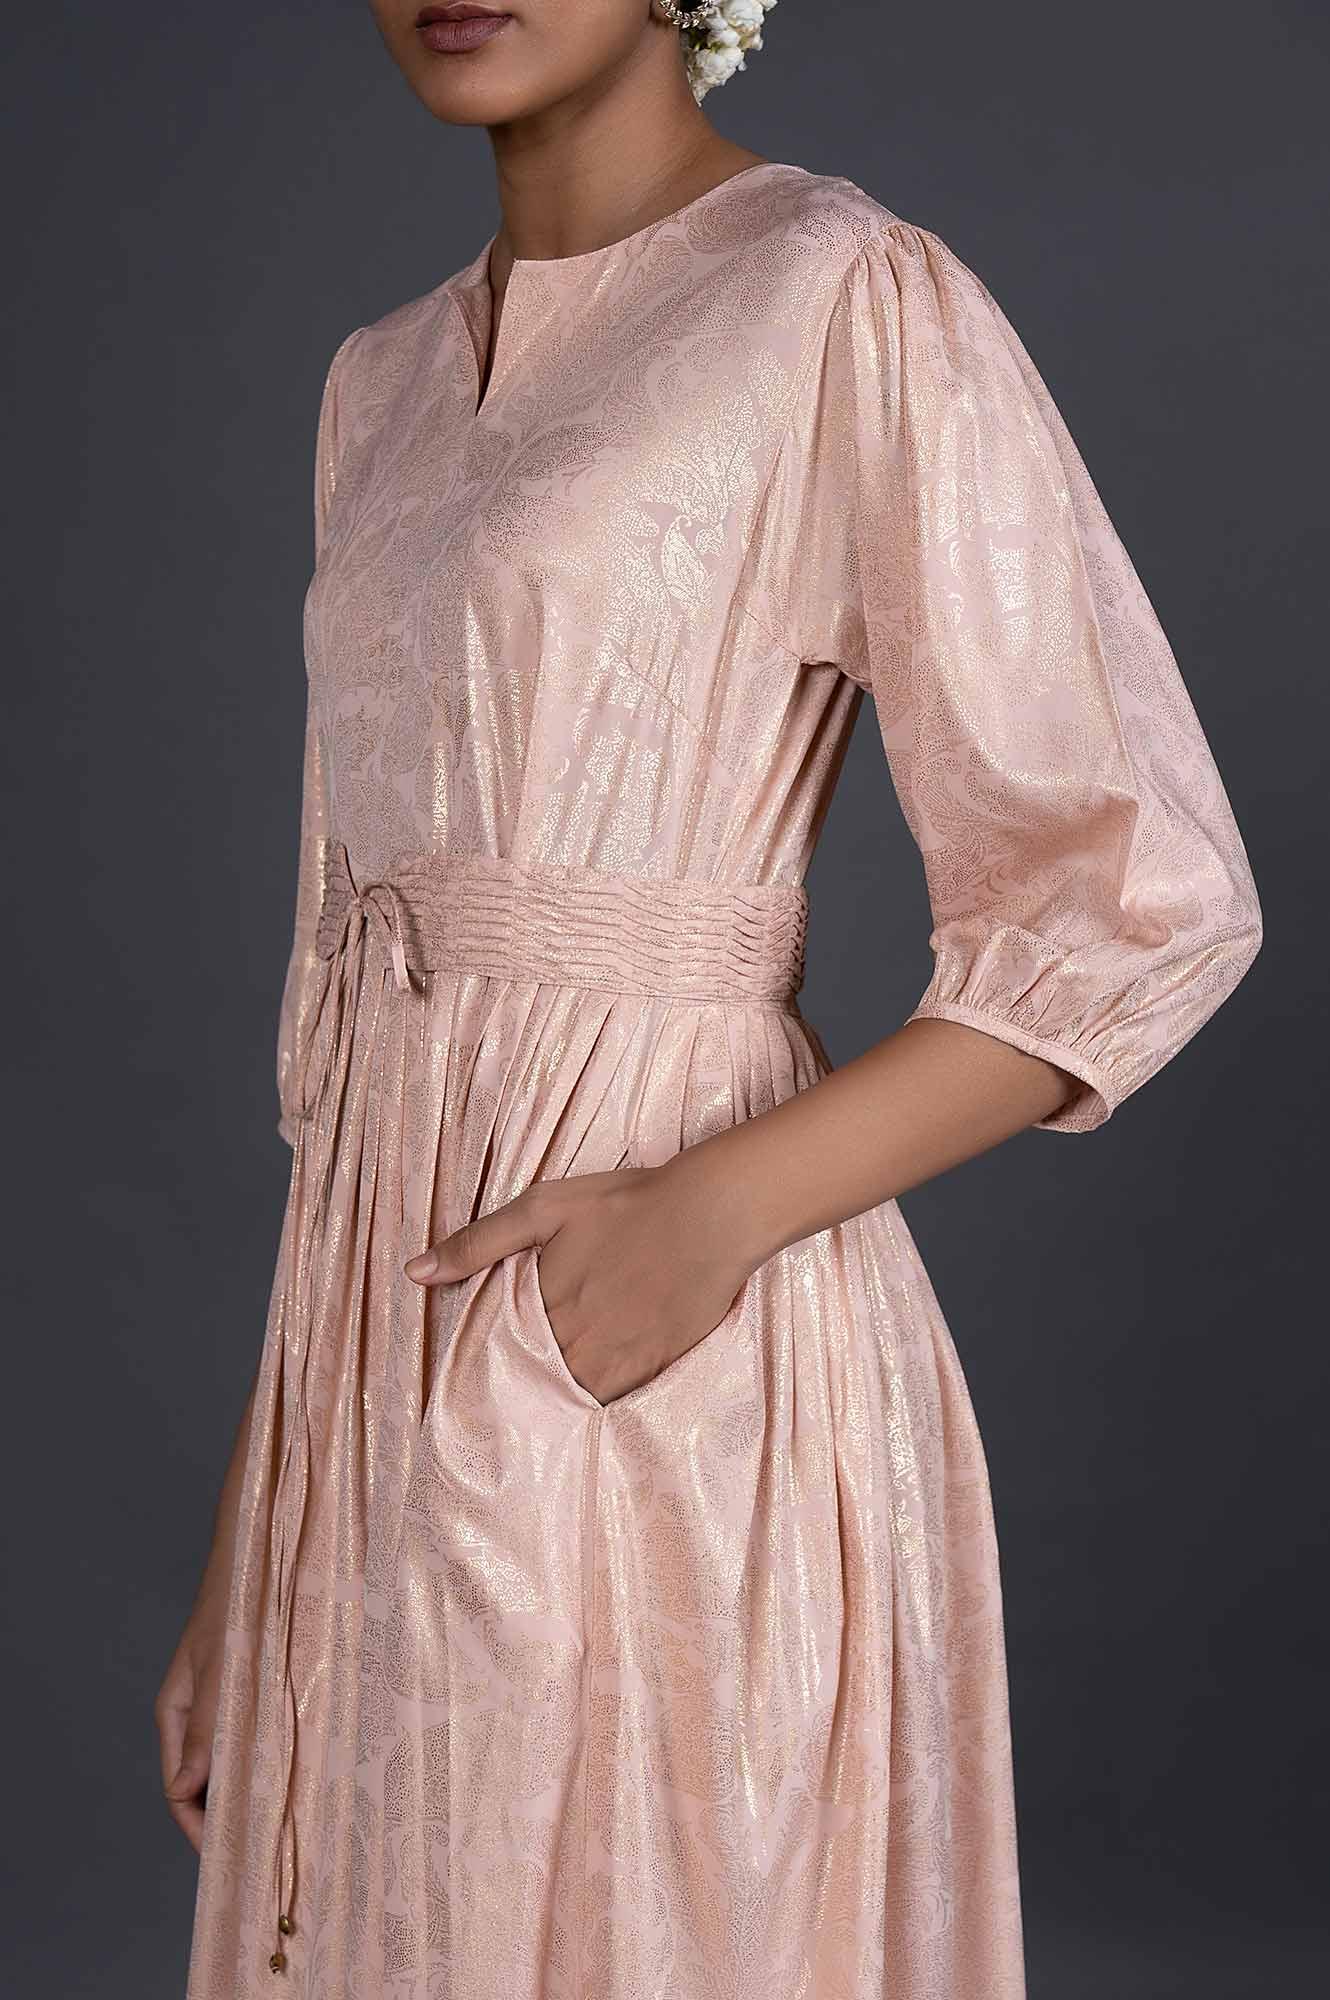 Light Pink Foil Printed Pleated Dress With Belt - wforwoman